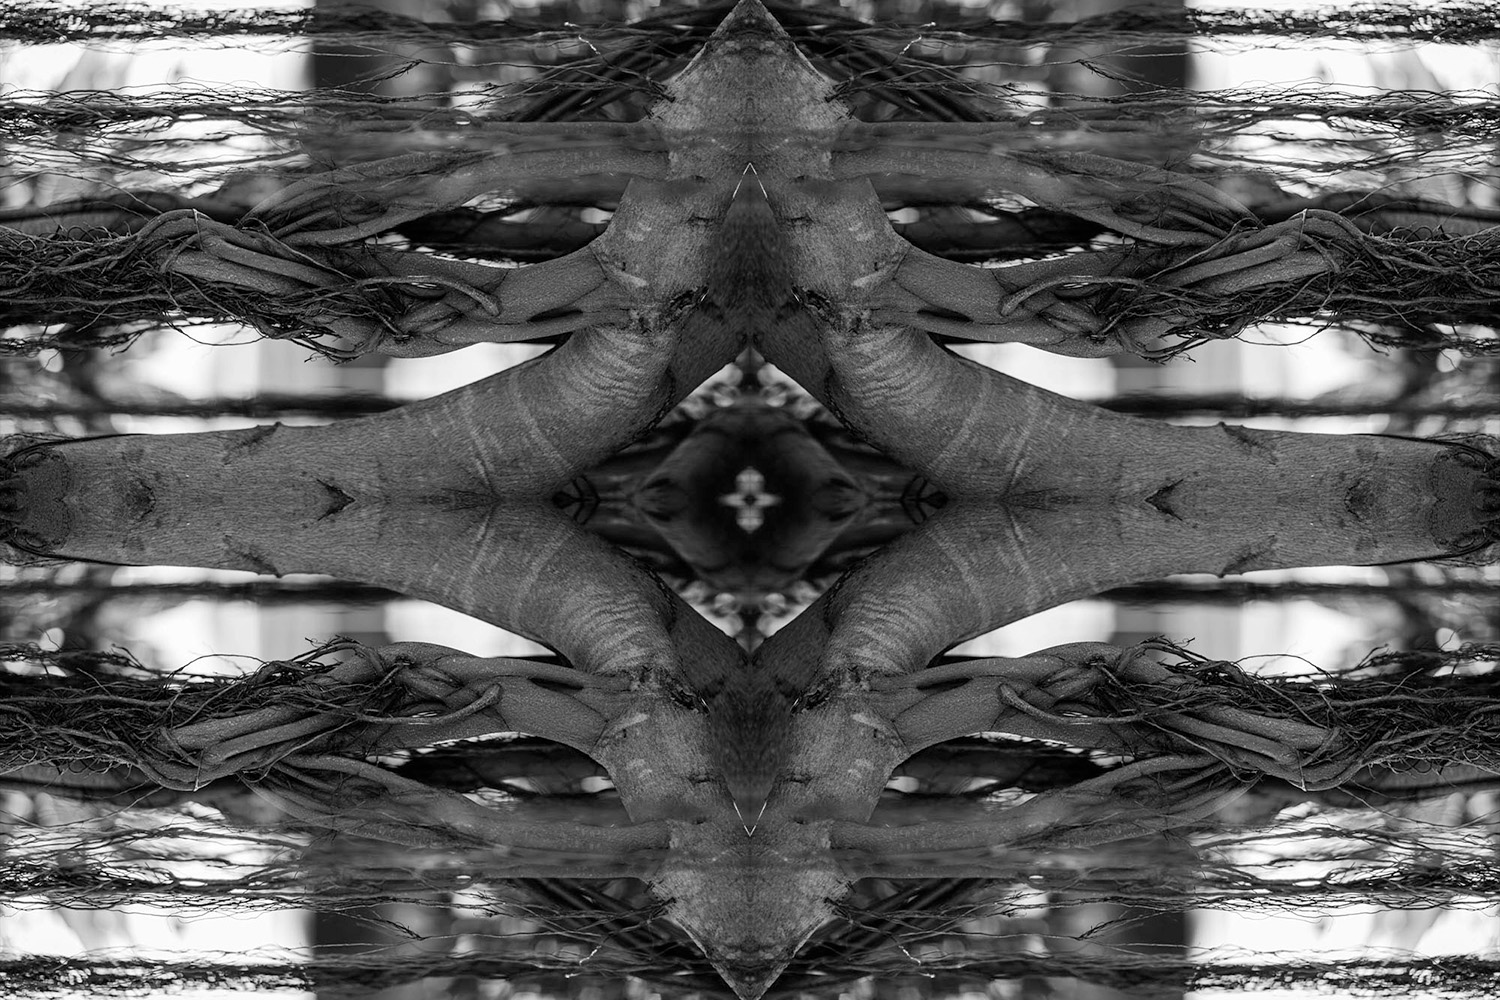 Black and white kaleidoscope artwork of a Banyan tree and its aerial roots.